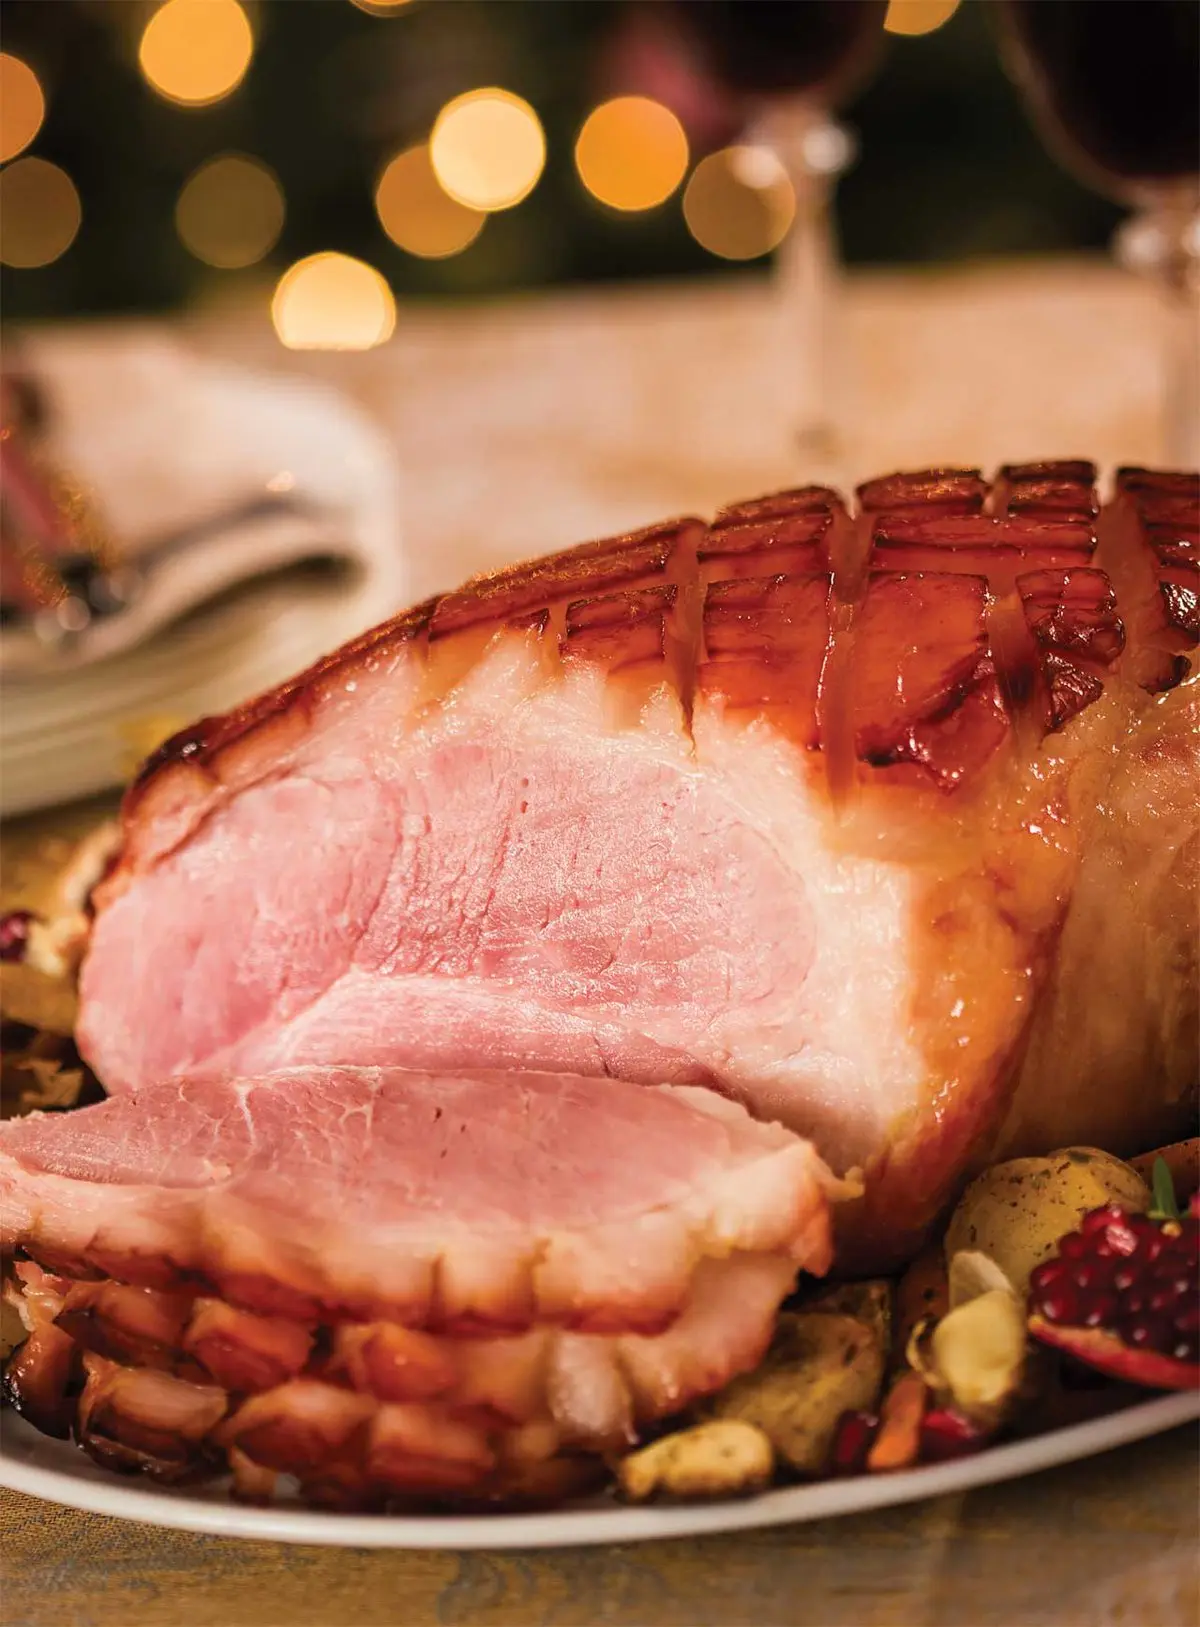 virginia smoked ham - What's the difference between a Virginia ham and a regular ham